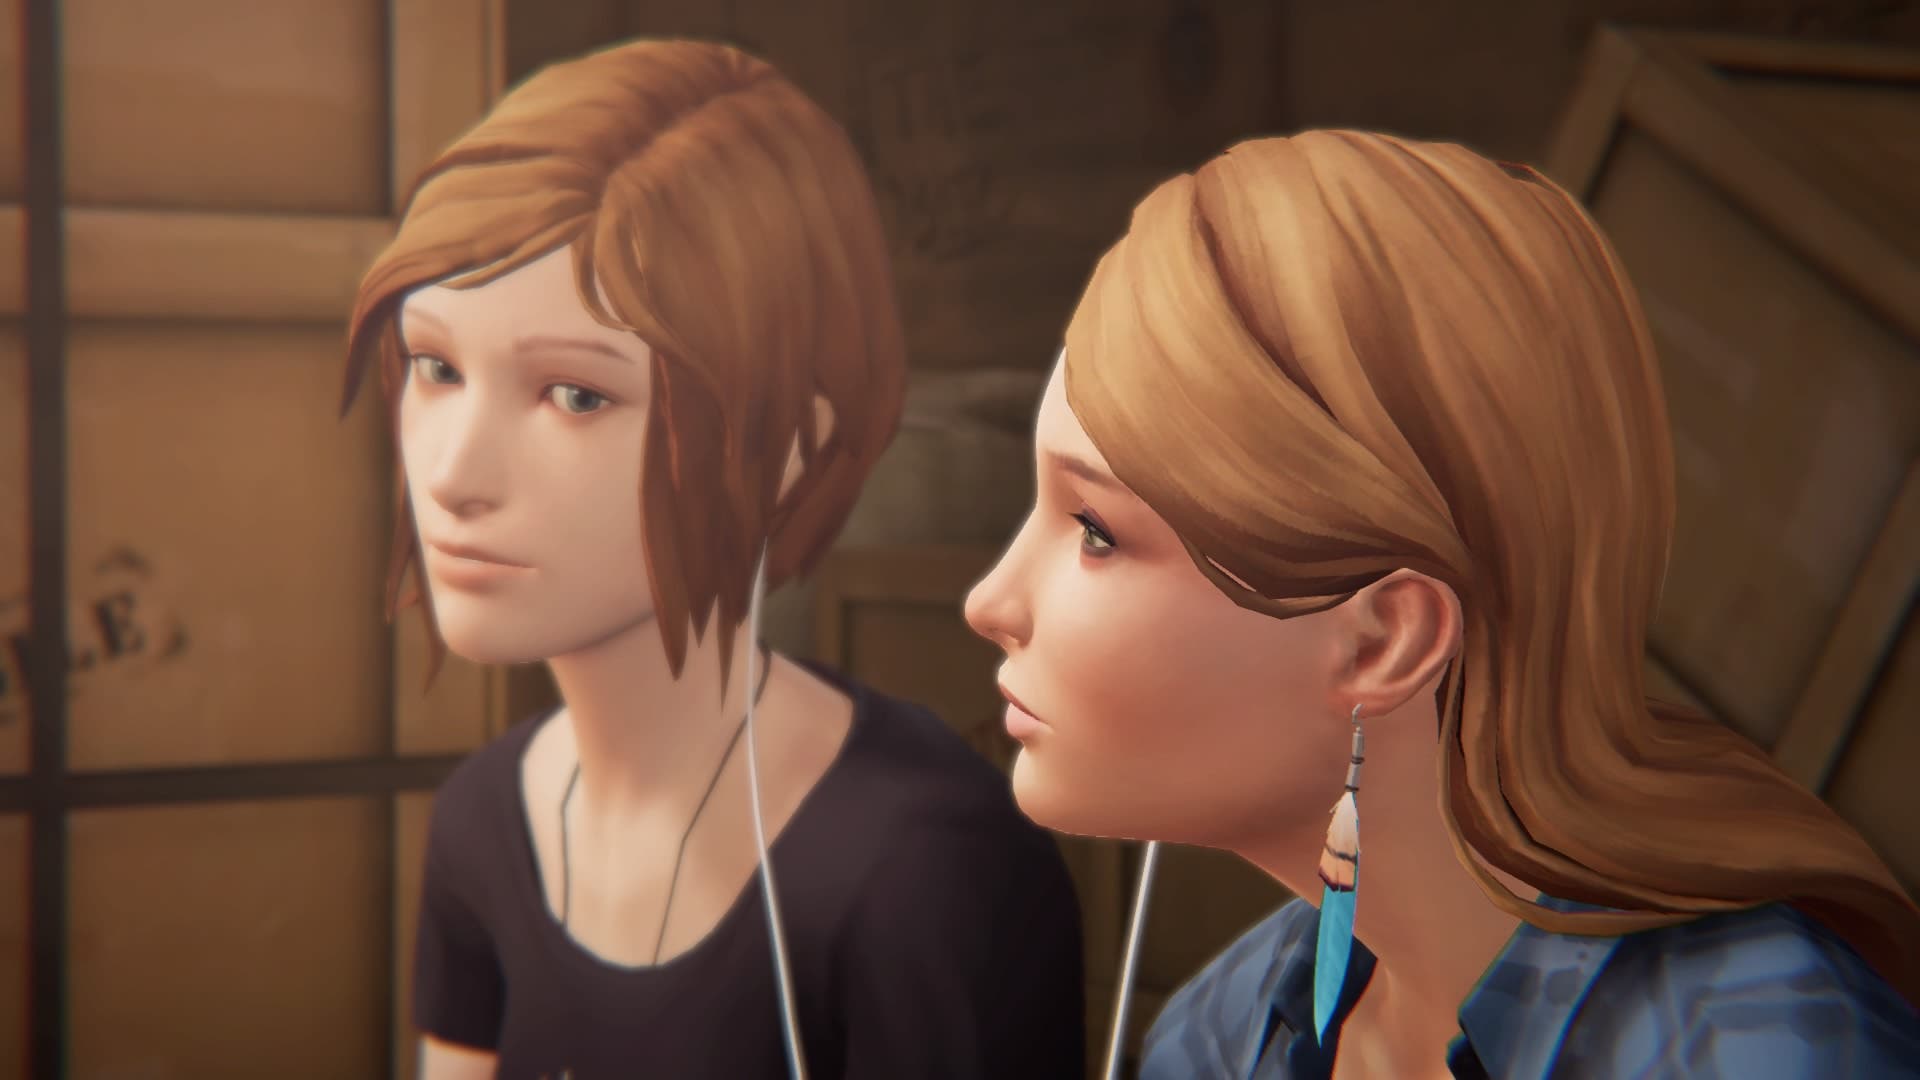 free download life is strange before the storm